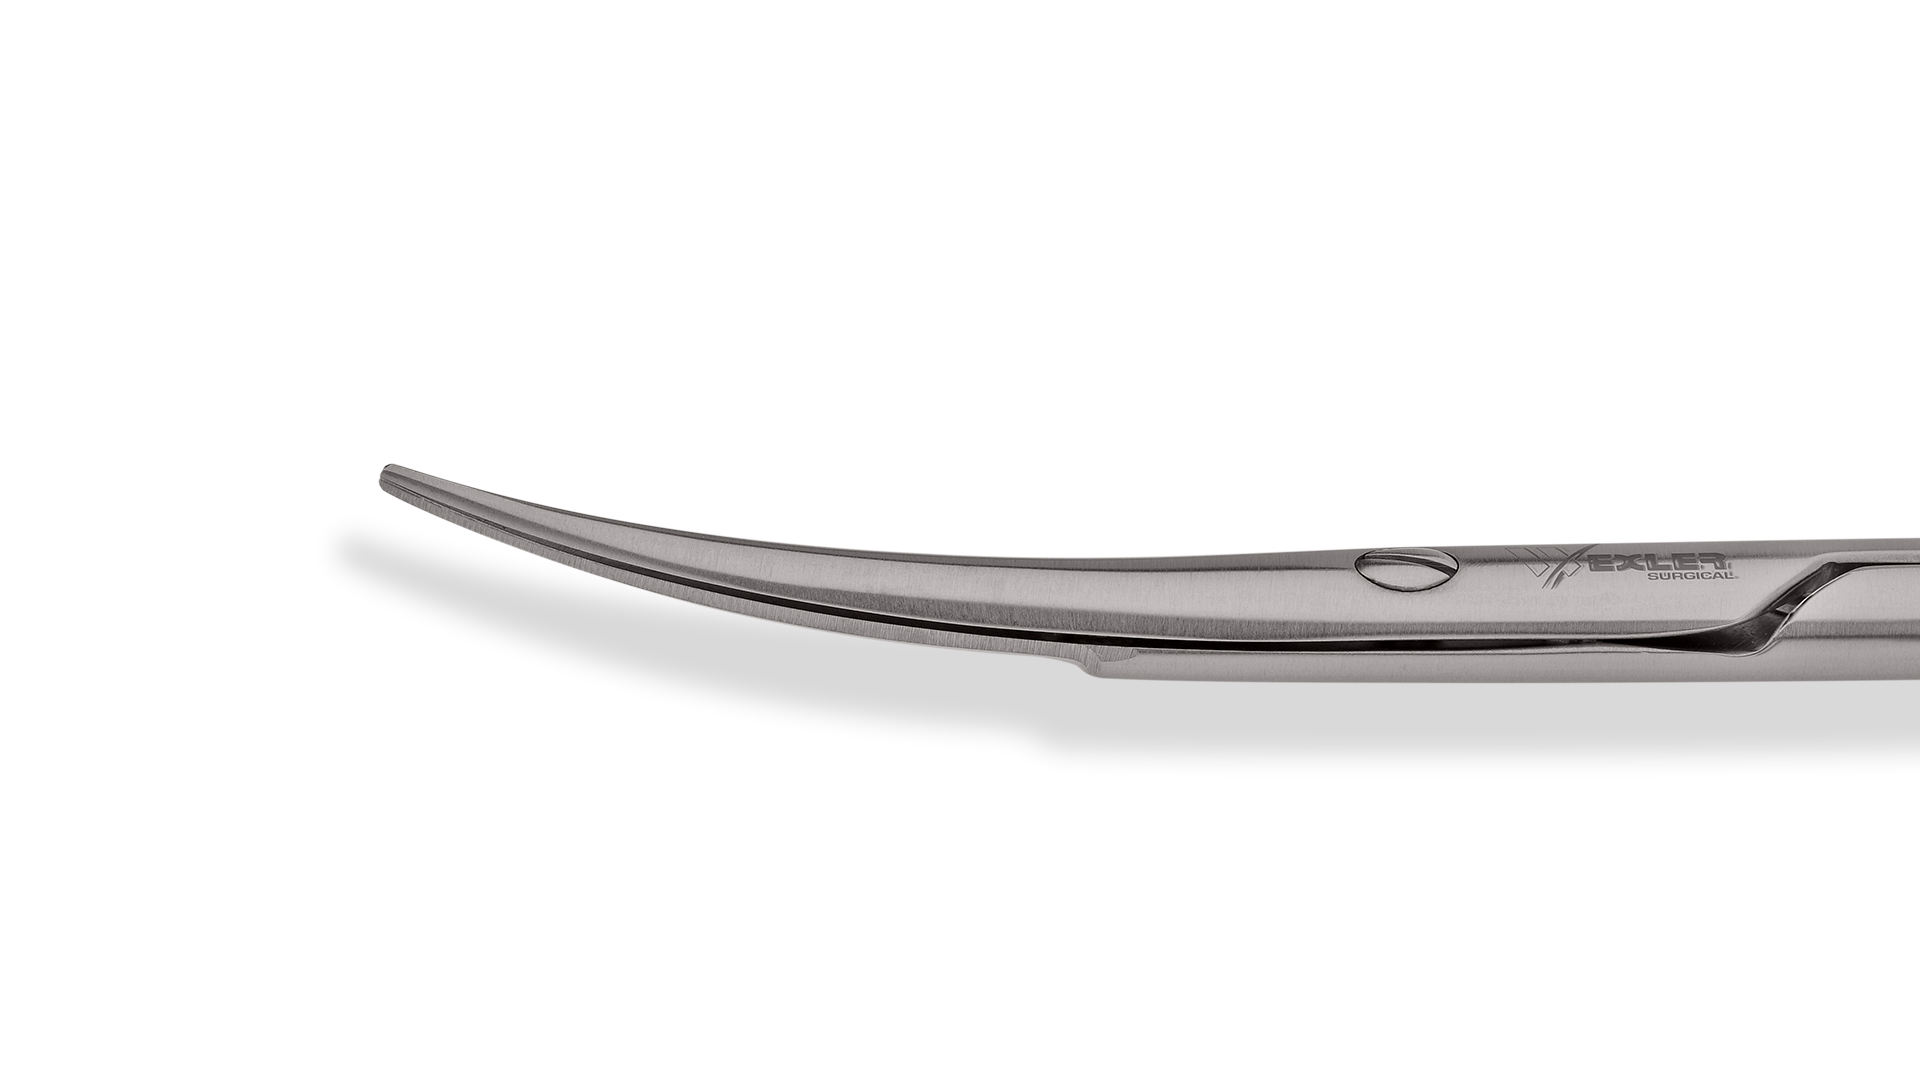 452R 11-090S Curved Enucleation Scissors, Blunt Tips, 38 mm Blades from  Midscrew to Tip, Ring Handle, Length 128 mm, Stainless Steel